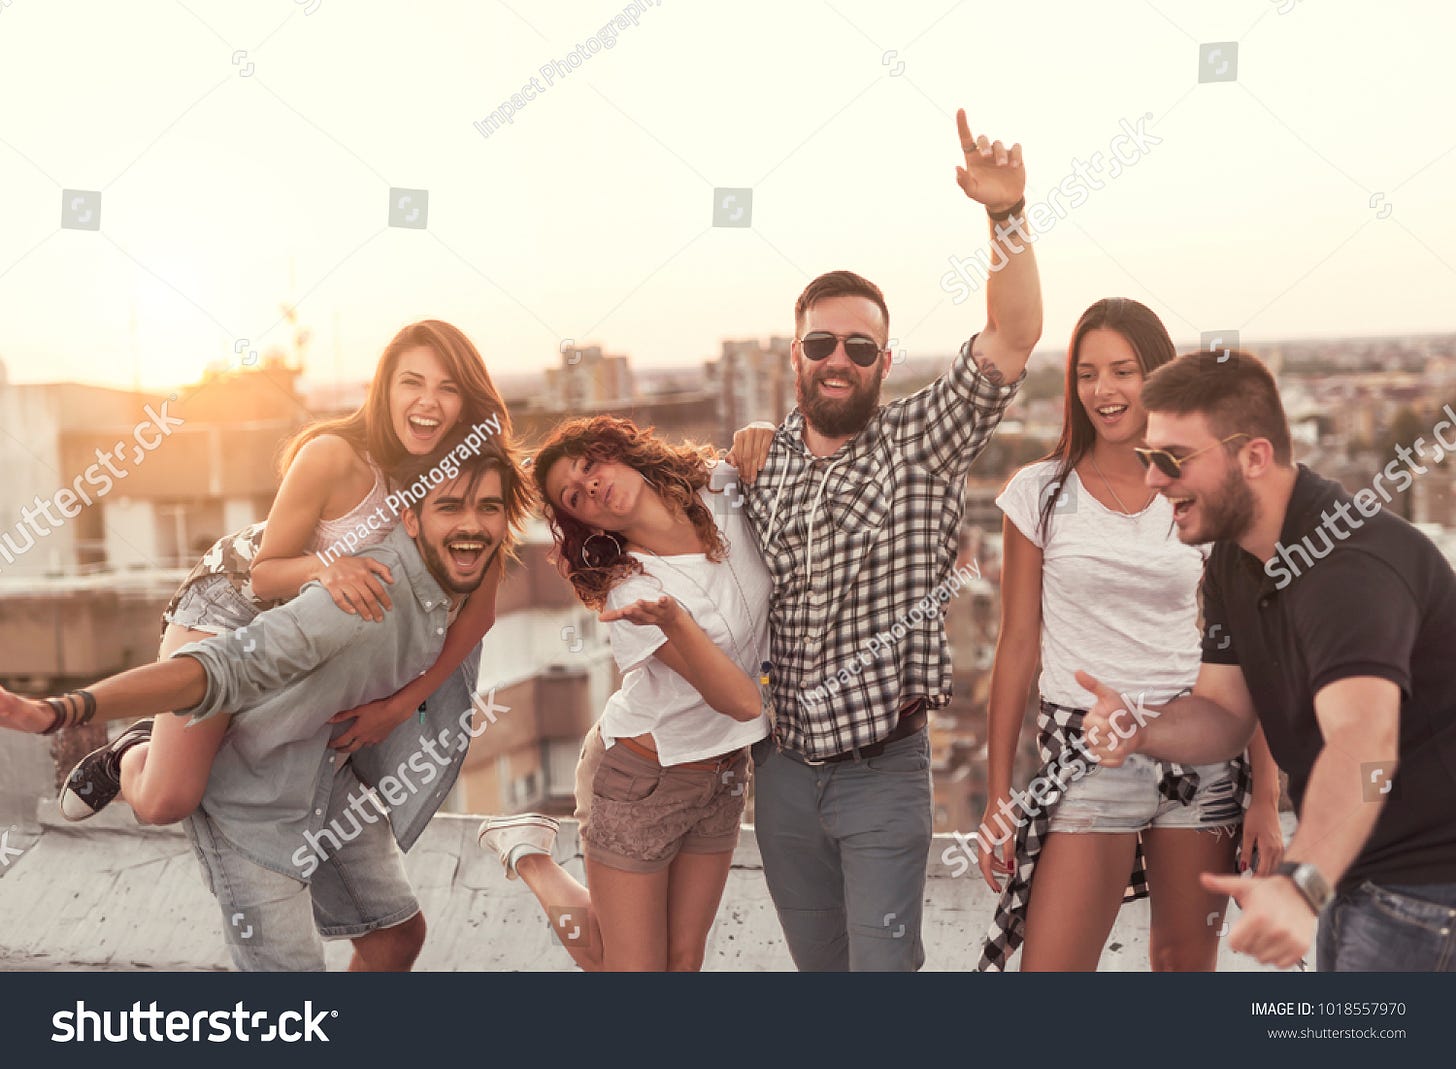 Group of young people having fun at a summertime rooftop party, at sunset. Focus on the people in the middle